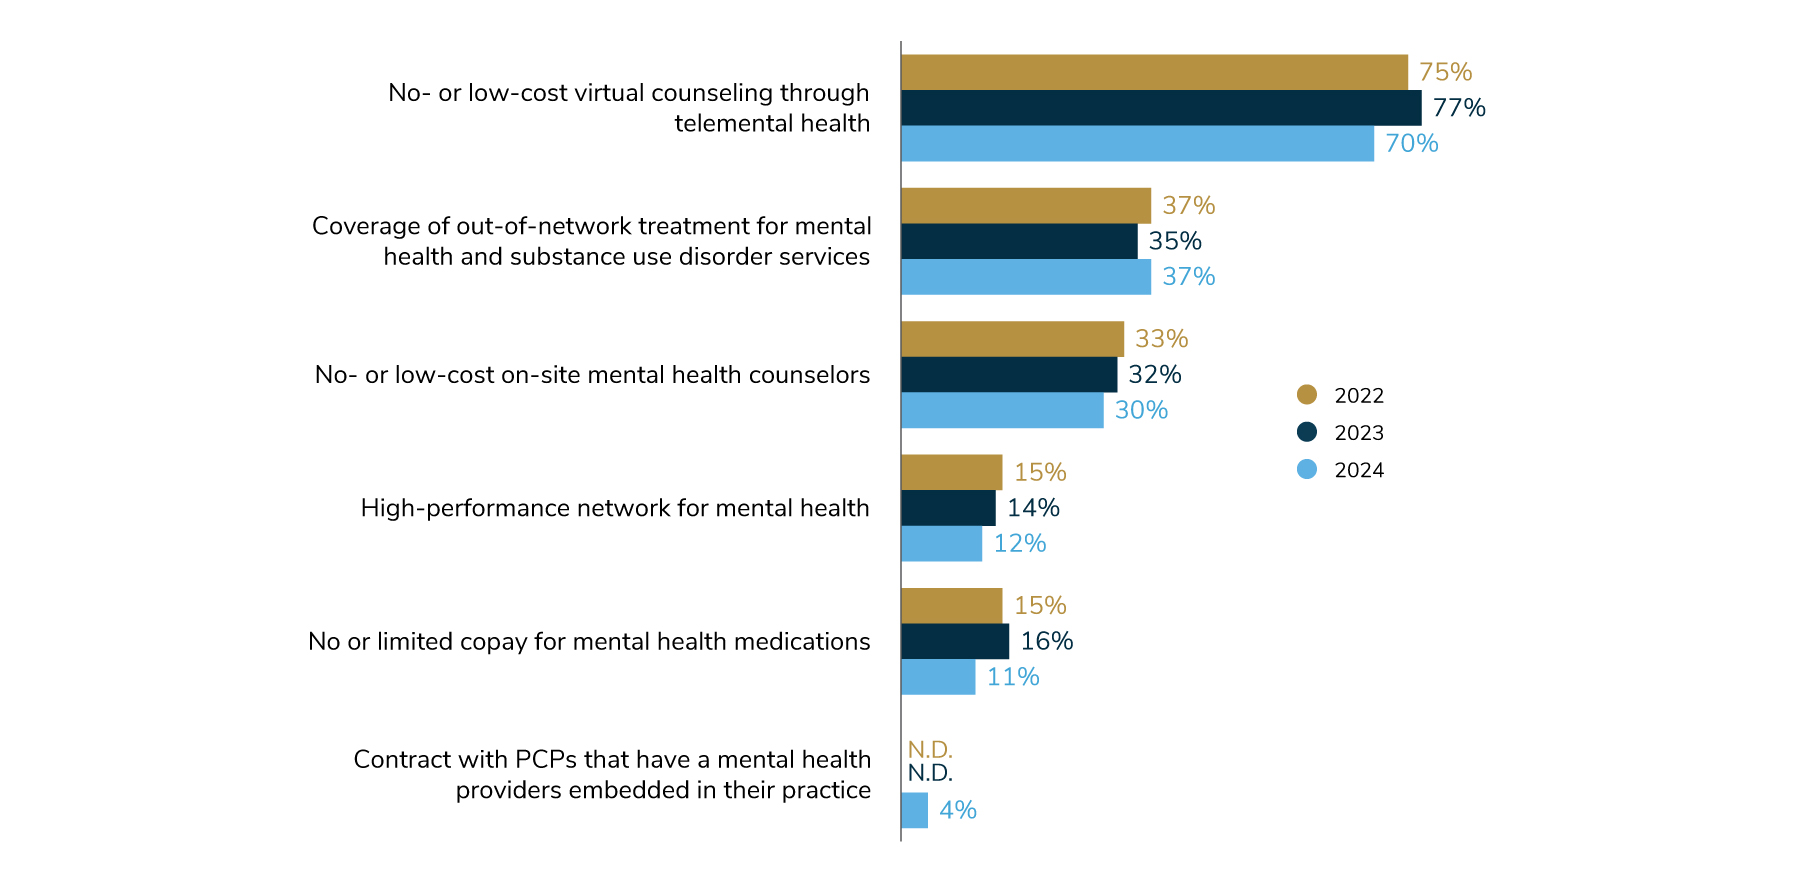 70% will offer no- or low-cost virtual counseling through telemental health. 37% will offer coverage to out-of-network treatment for mental health and substance use disorder services. 30% will offer no- or low-cost on-site mental health counselors.
